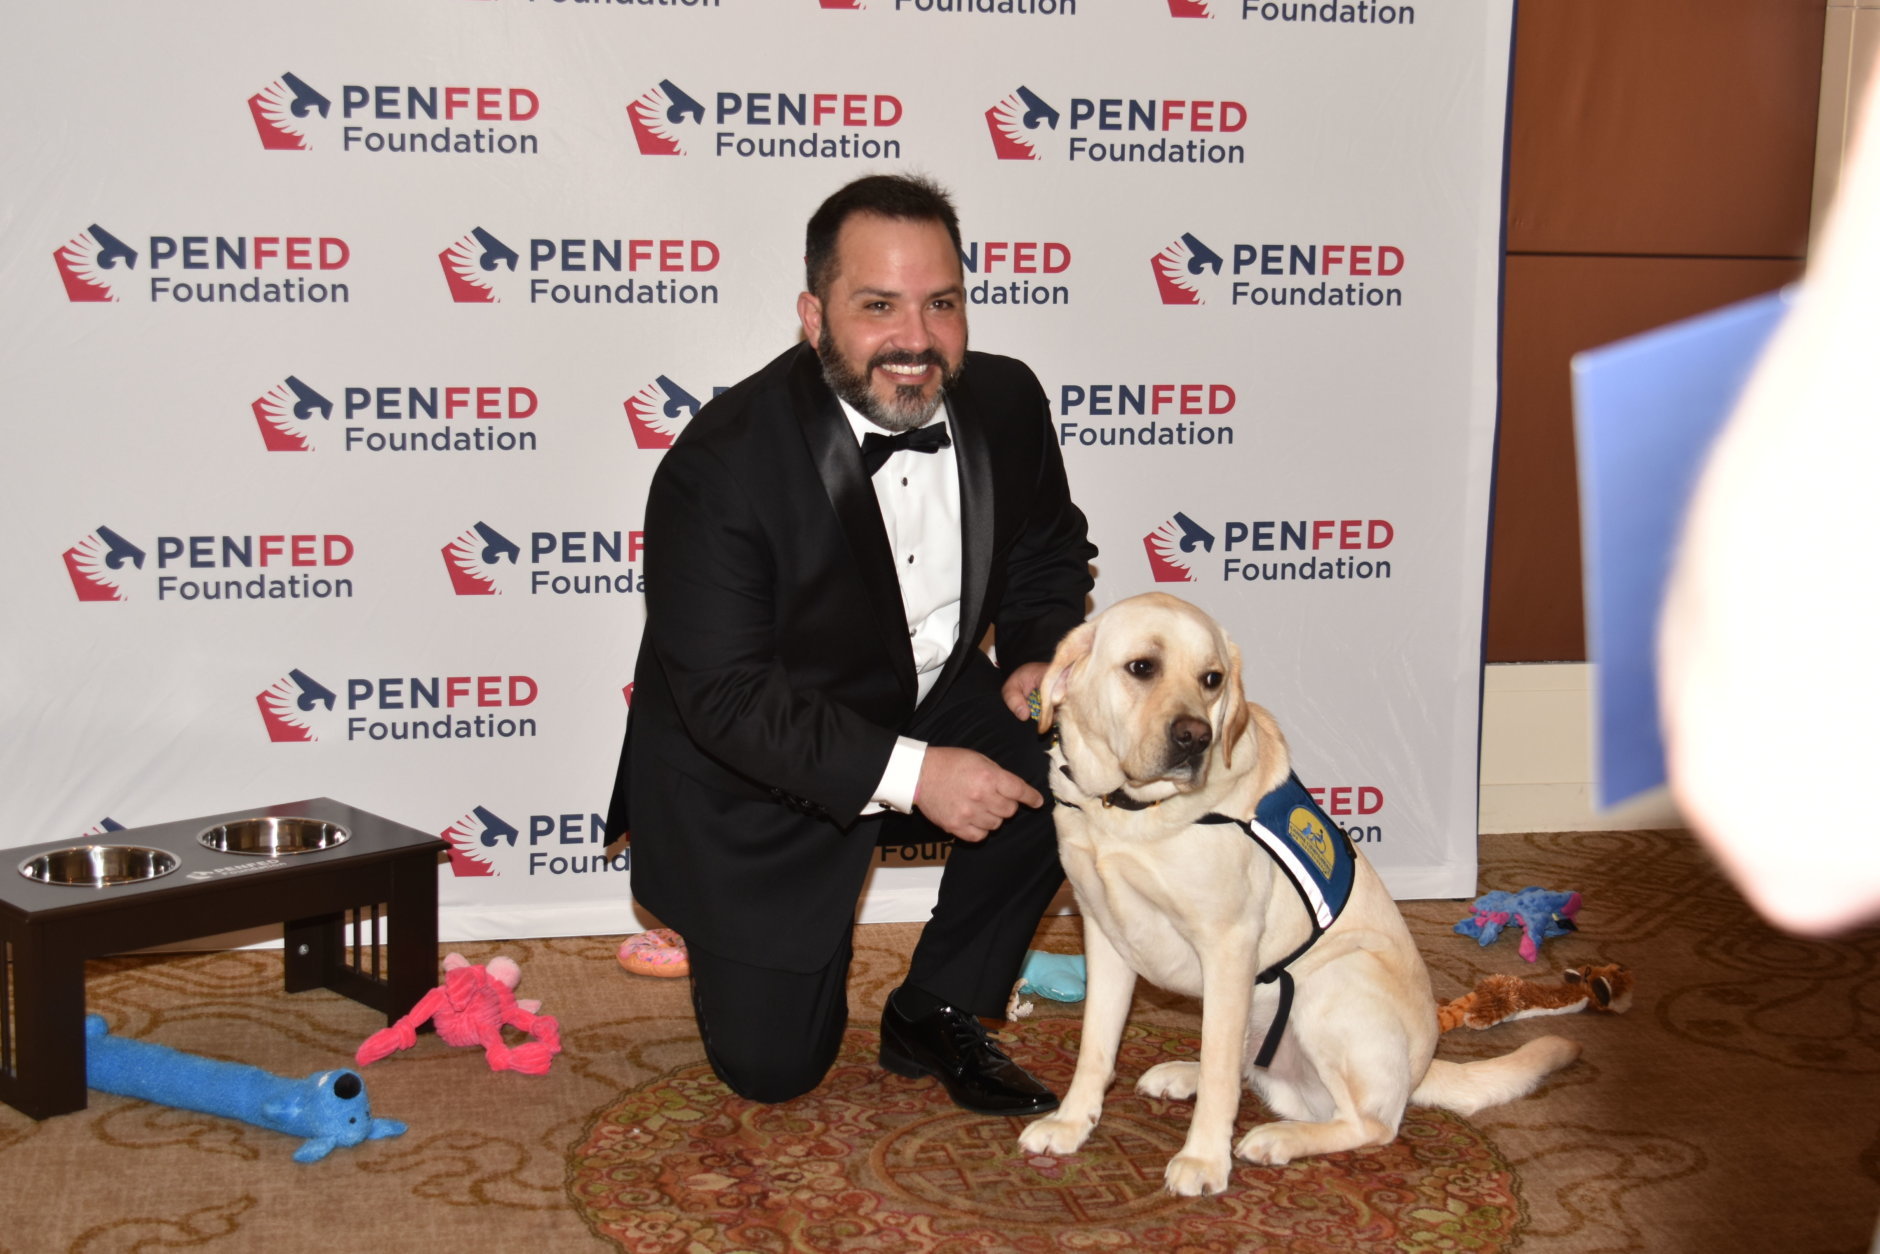 At the 2018 Night of Heroes Gala, Maj. Vincent Cerichone, of Springfield, Virginia, poses with his assistant dog, Taco, that he received through Canine Companions For Independence. It’s one of three organizations that train service dogs for veterans that each received $50,000 from the PenFed Foundation. (Courtesy PenFed)